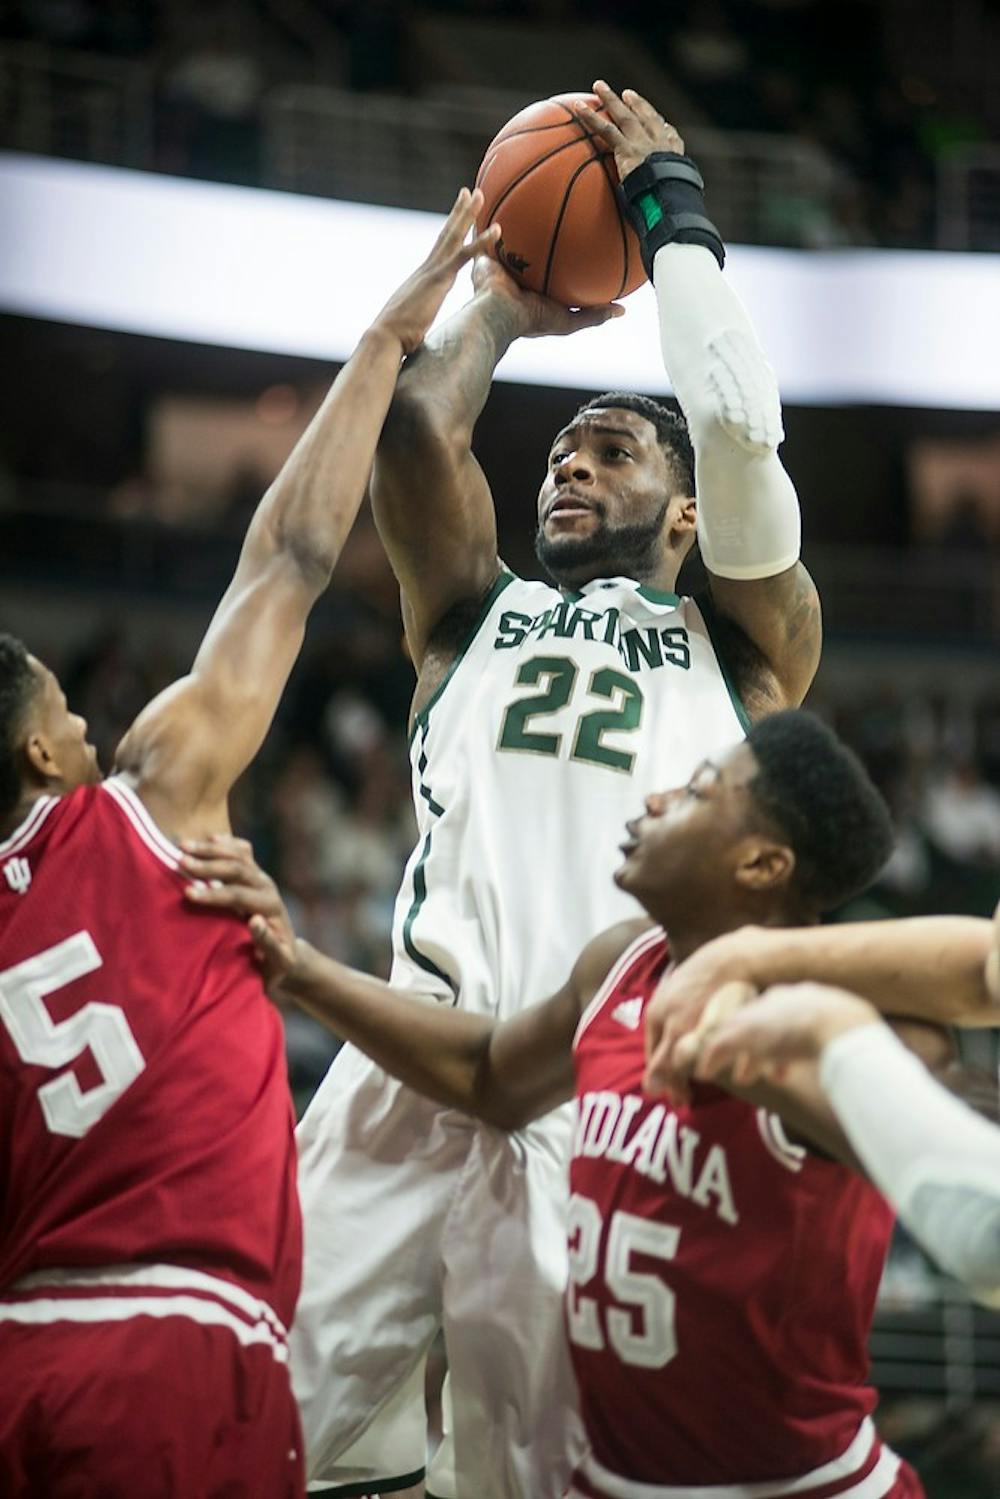 <p>Senior forward/guard Branden Dawson shoots for a basket over Indiana forward Troy Williams and forward Emmitt Holt Jan. 5, 2015, during the game against Indiana at Breslin Center. At halftime, the Spartans were leading the hoosiers, 36-17. Erin Hampton/The State News</p>